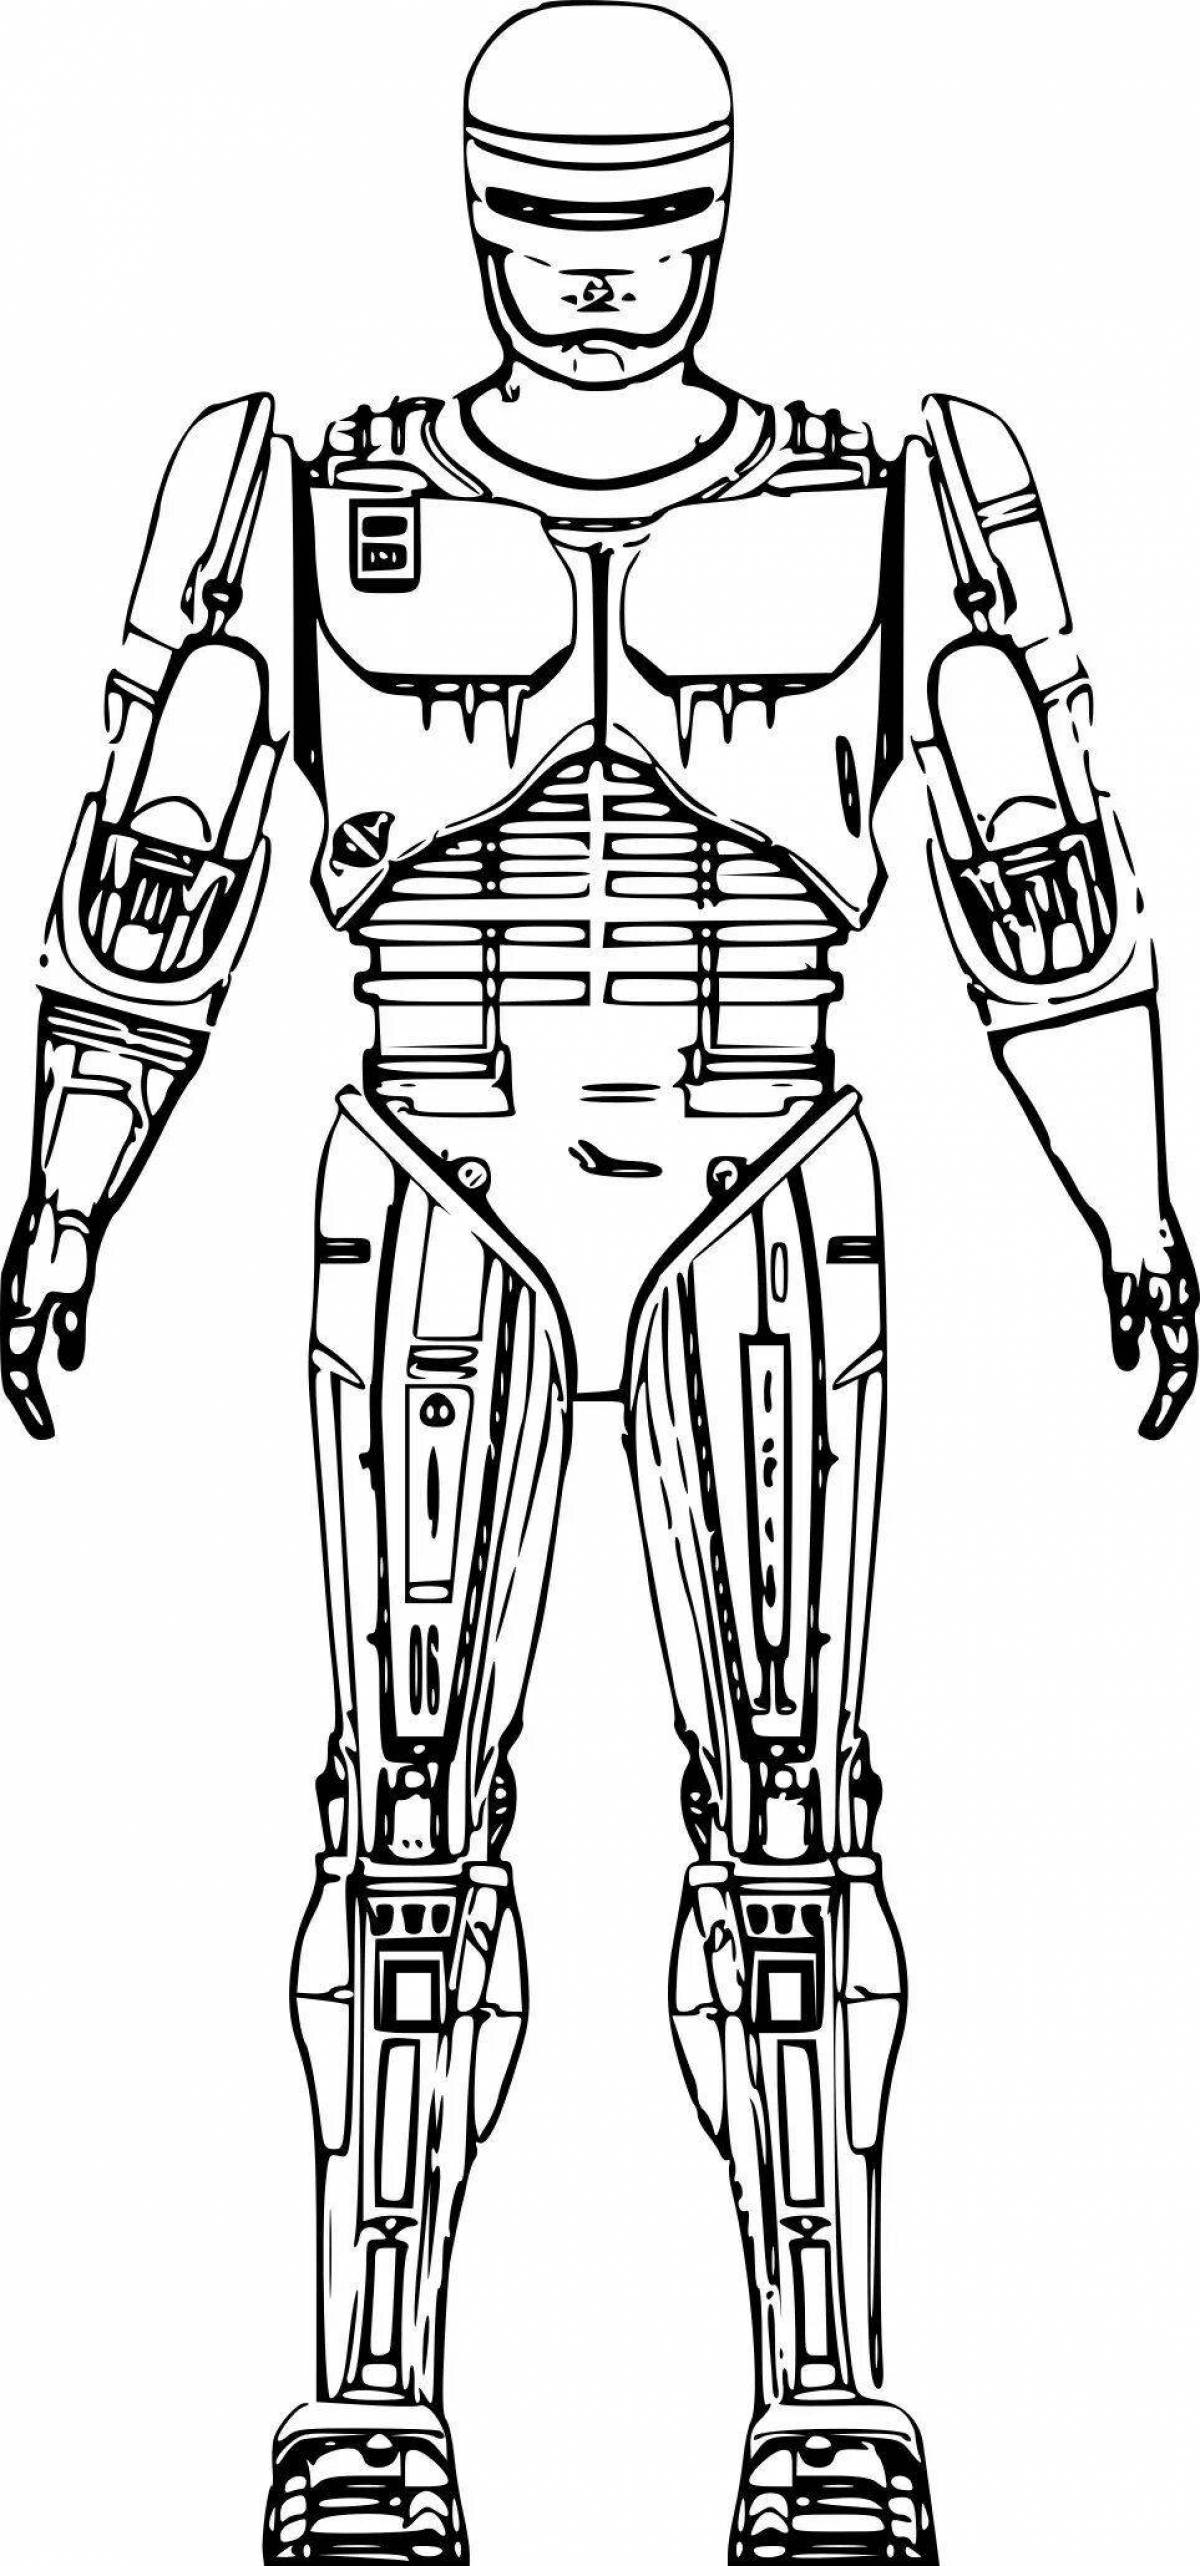 Glorious police robot coloring book for kids